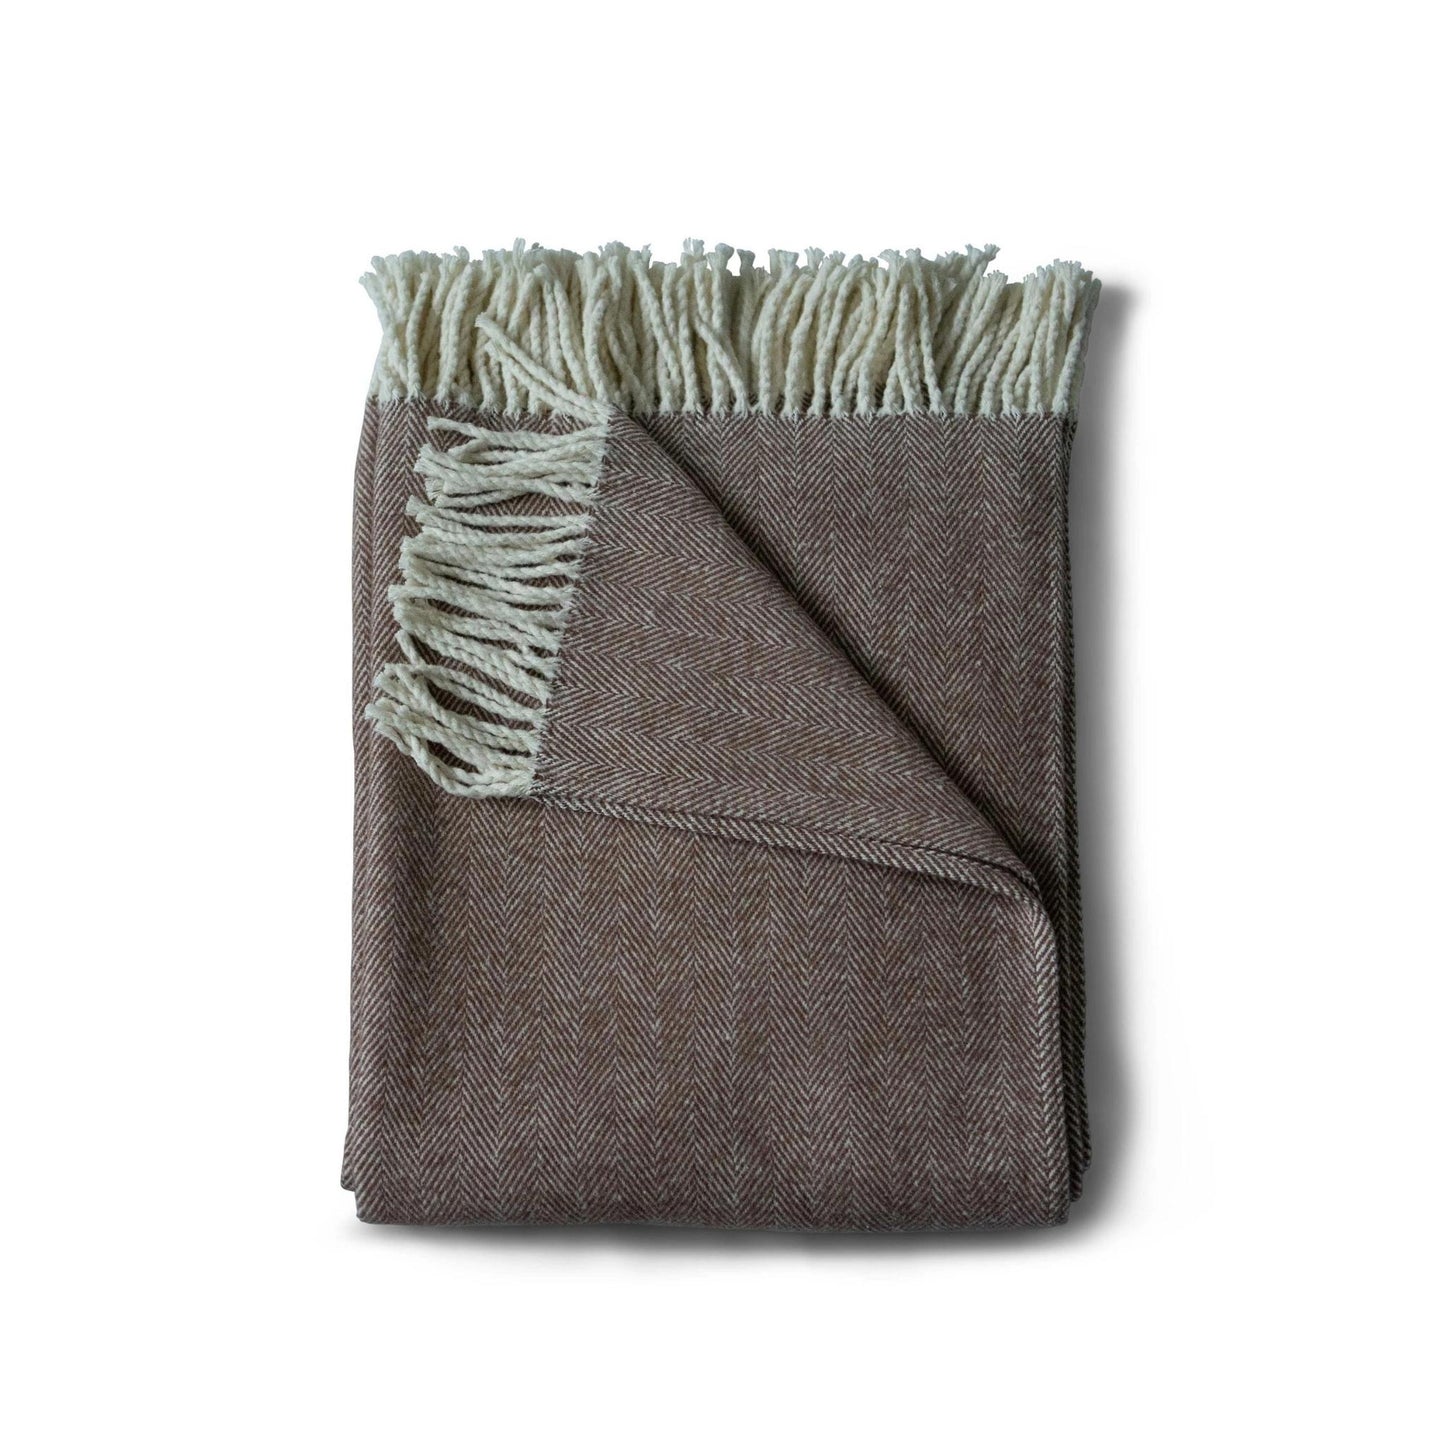 Brushed Cotton Cozy Throw Blanket